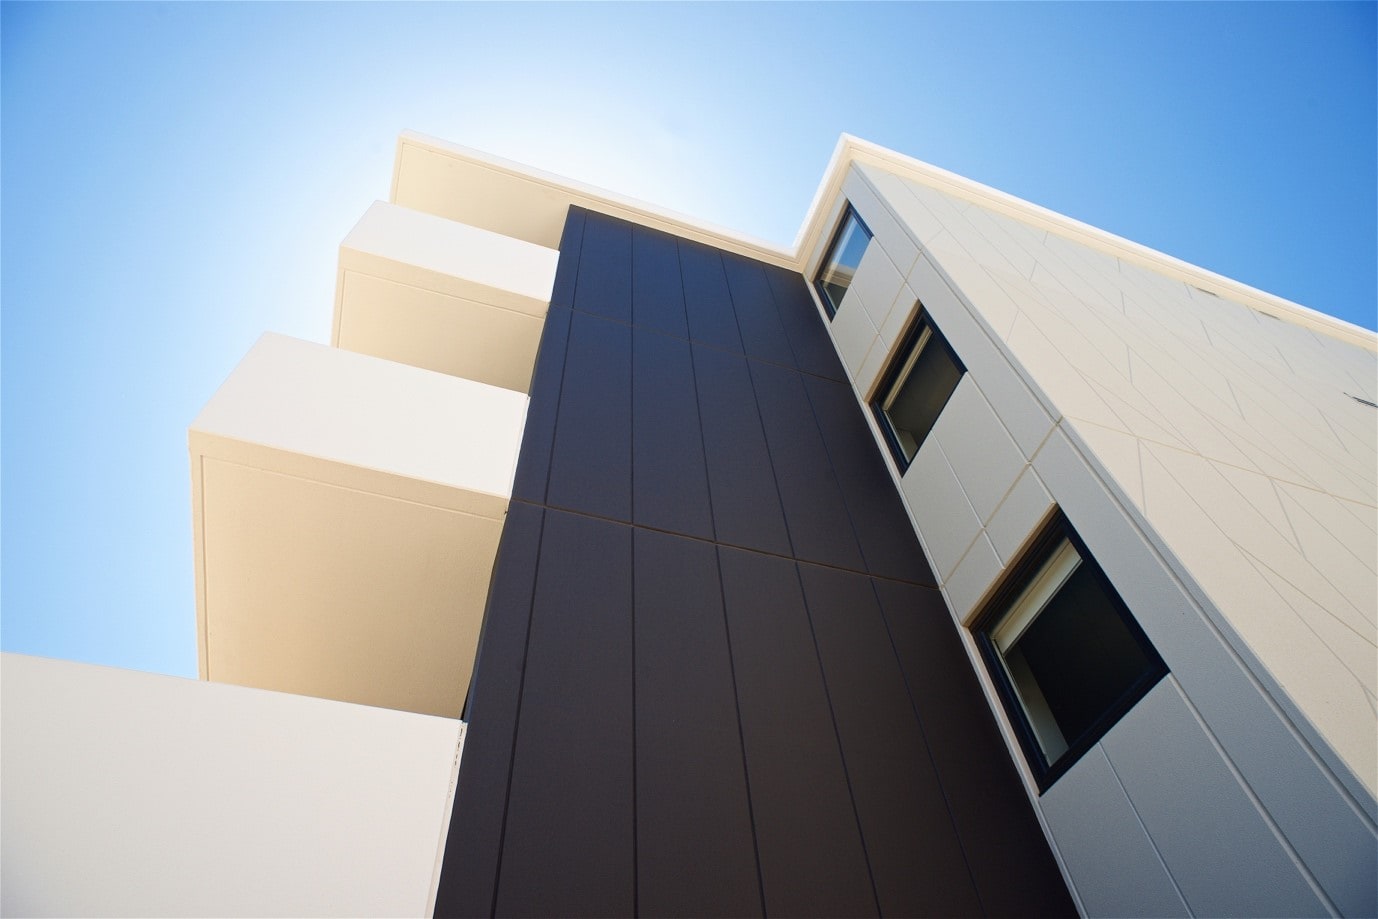 ALAND harnesses the sustainable beauty of Hebel’s PowerPattern® panels at Schofield Gardens